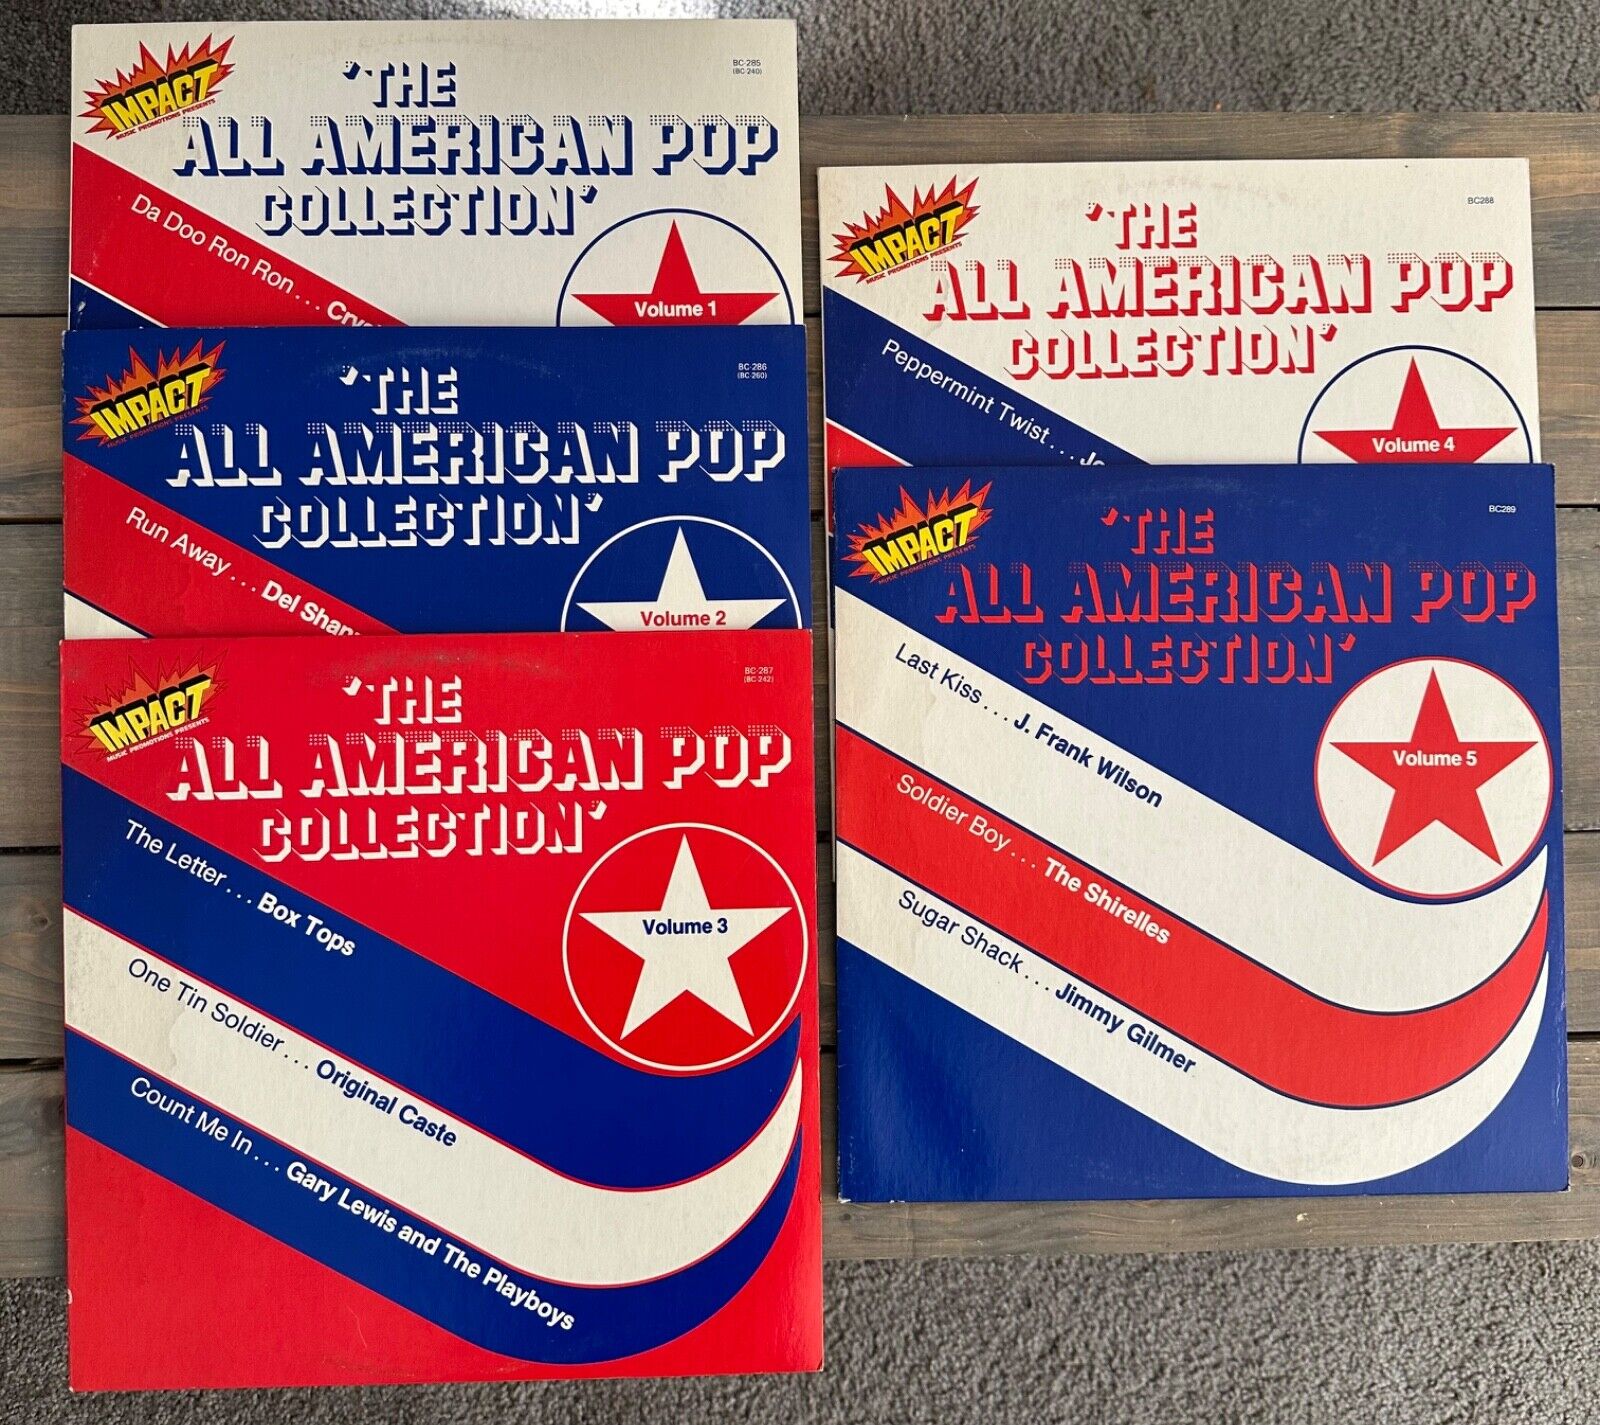 The All American Pop Collection Volumes 1-5 Vinyl LPs (1980)